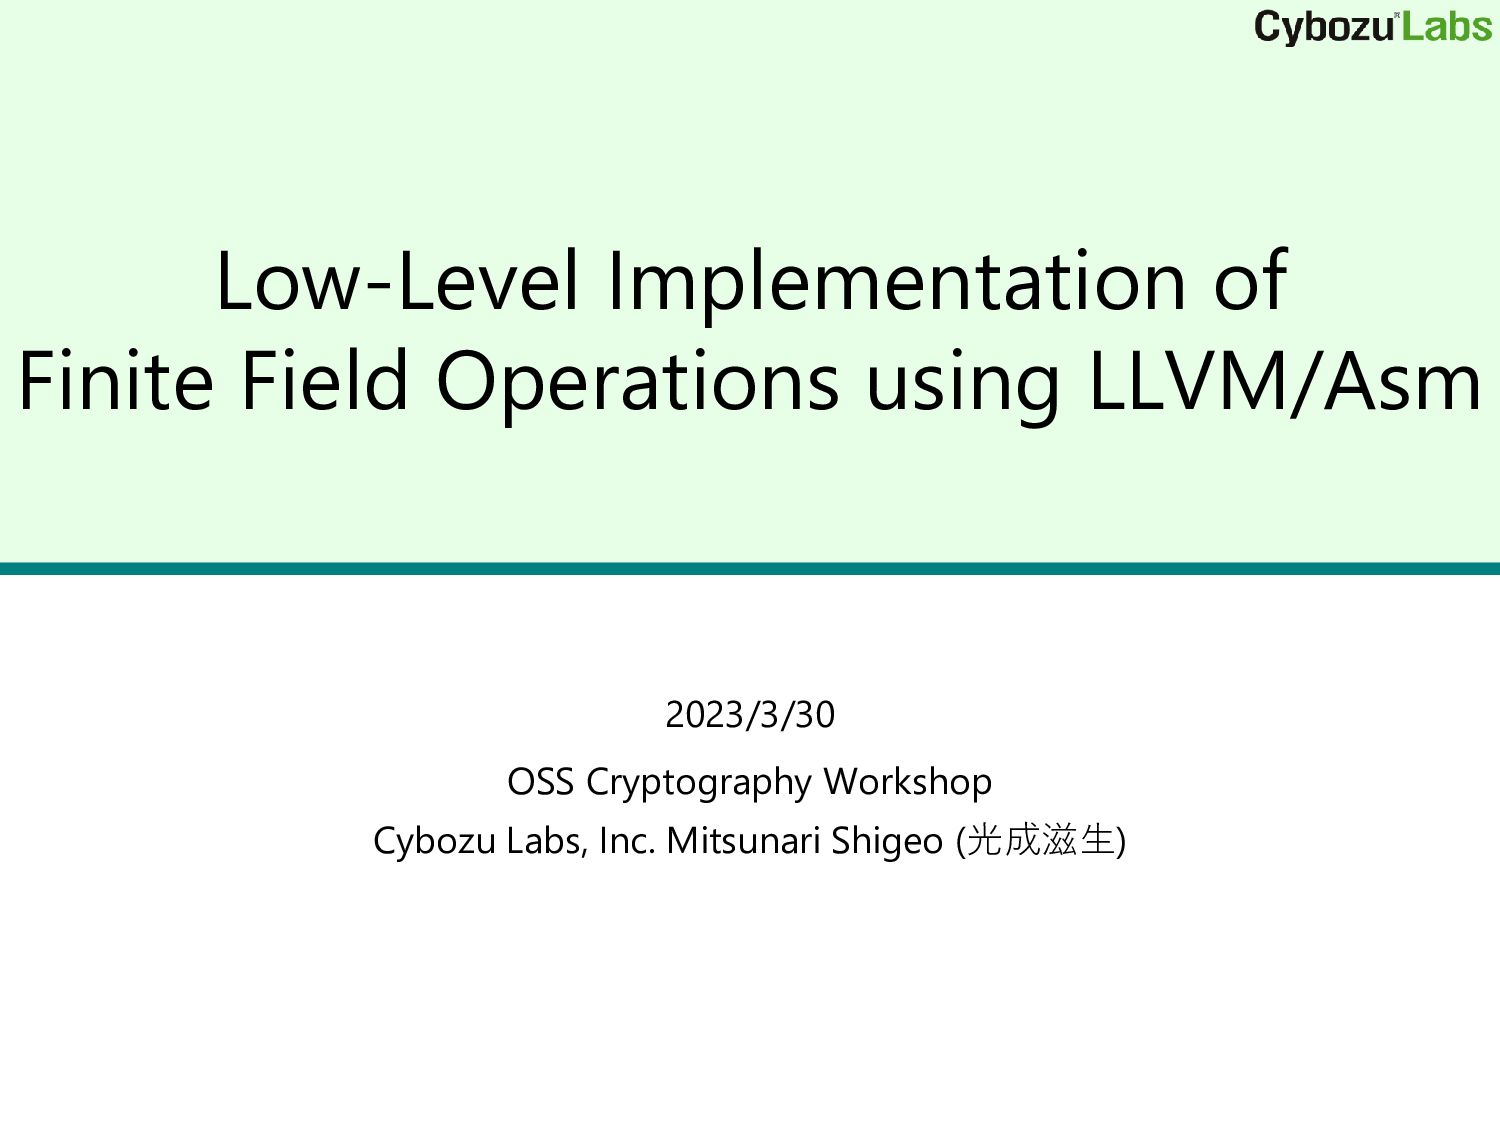 Slide Top: Low-Level Implementation of Finite Field Operations using LLVM/Asm